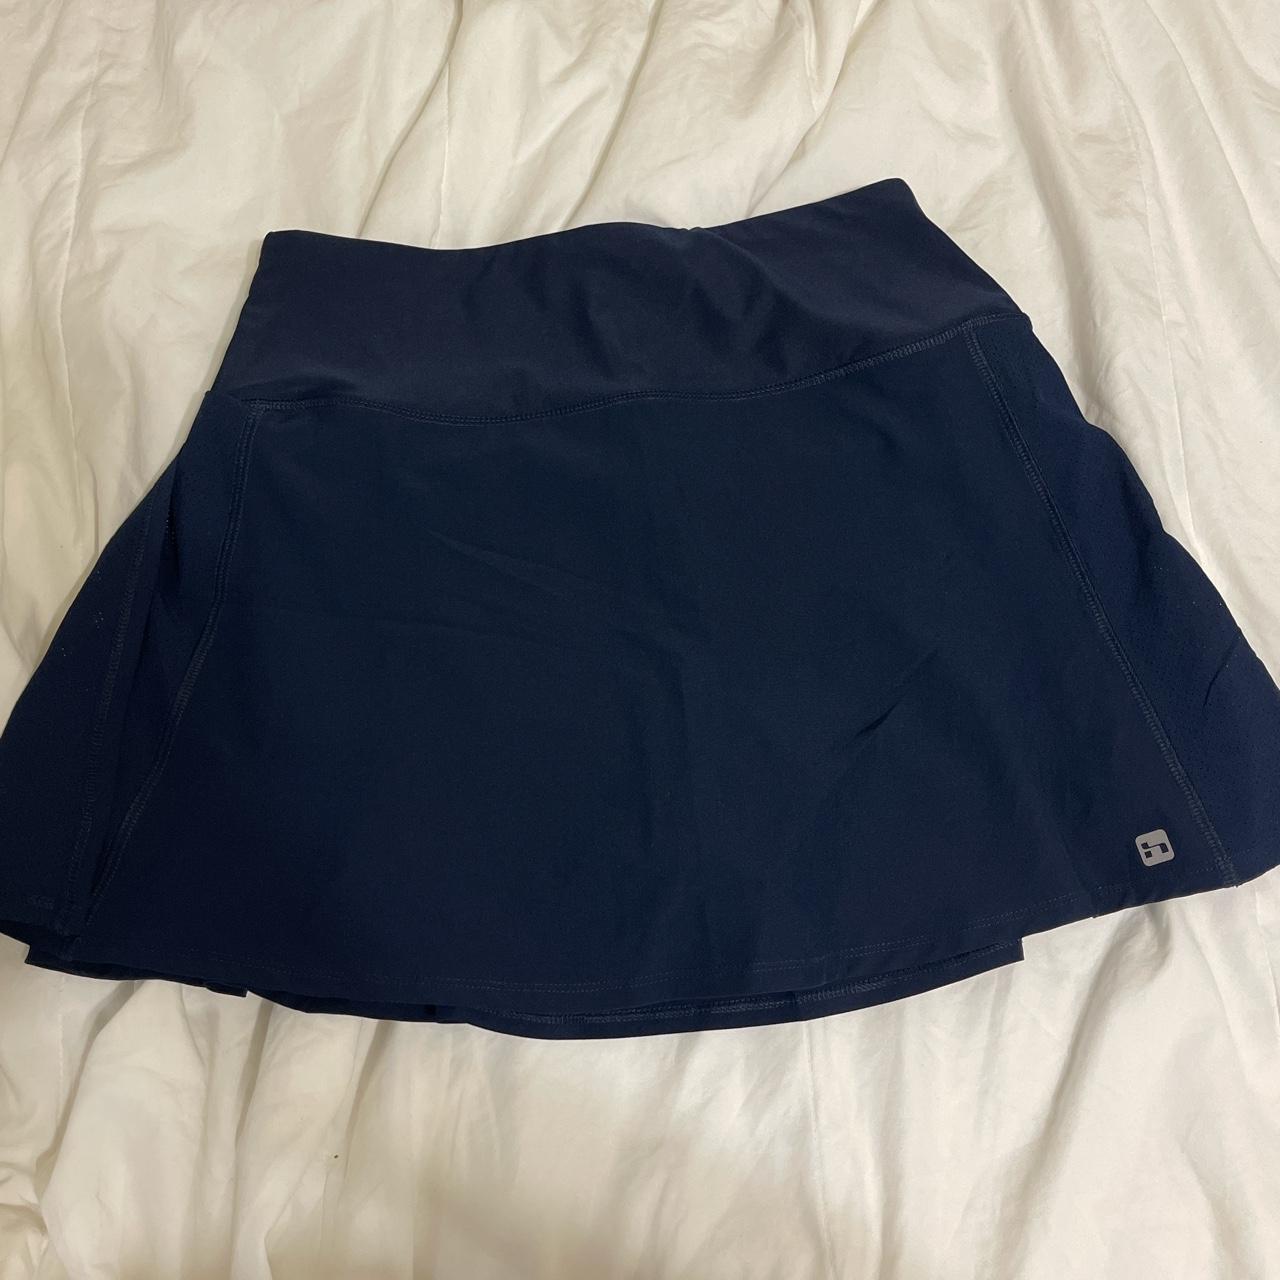 hind navy blue tennis skirt w/ built in shorts and... - Depop